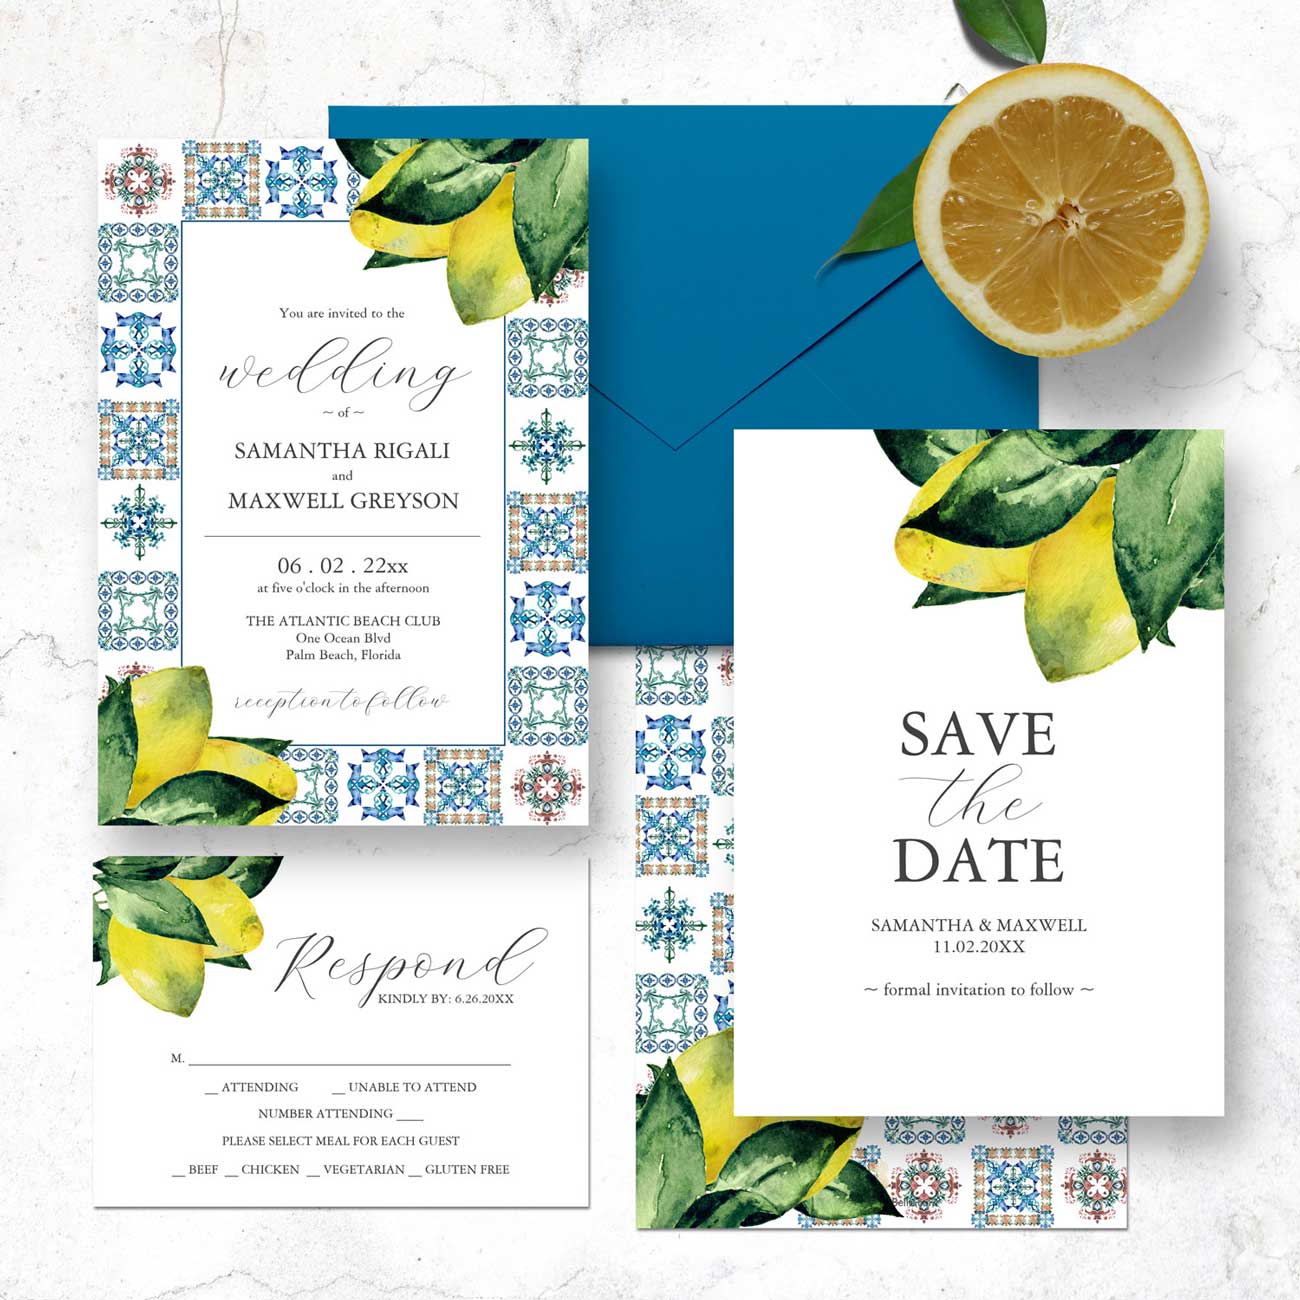 Elegant wedding invitations feature Amalfi inspired tile art with watercolor lemons by Victoria Grigaliunas of Do Tell A Belle. Click to shop the complete line.